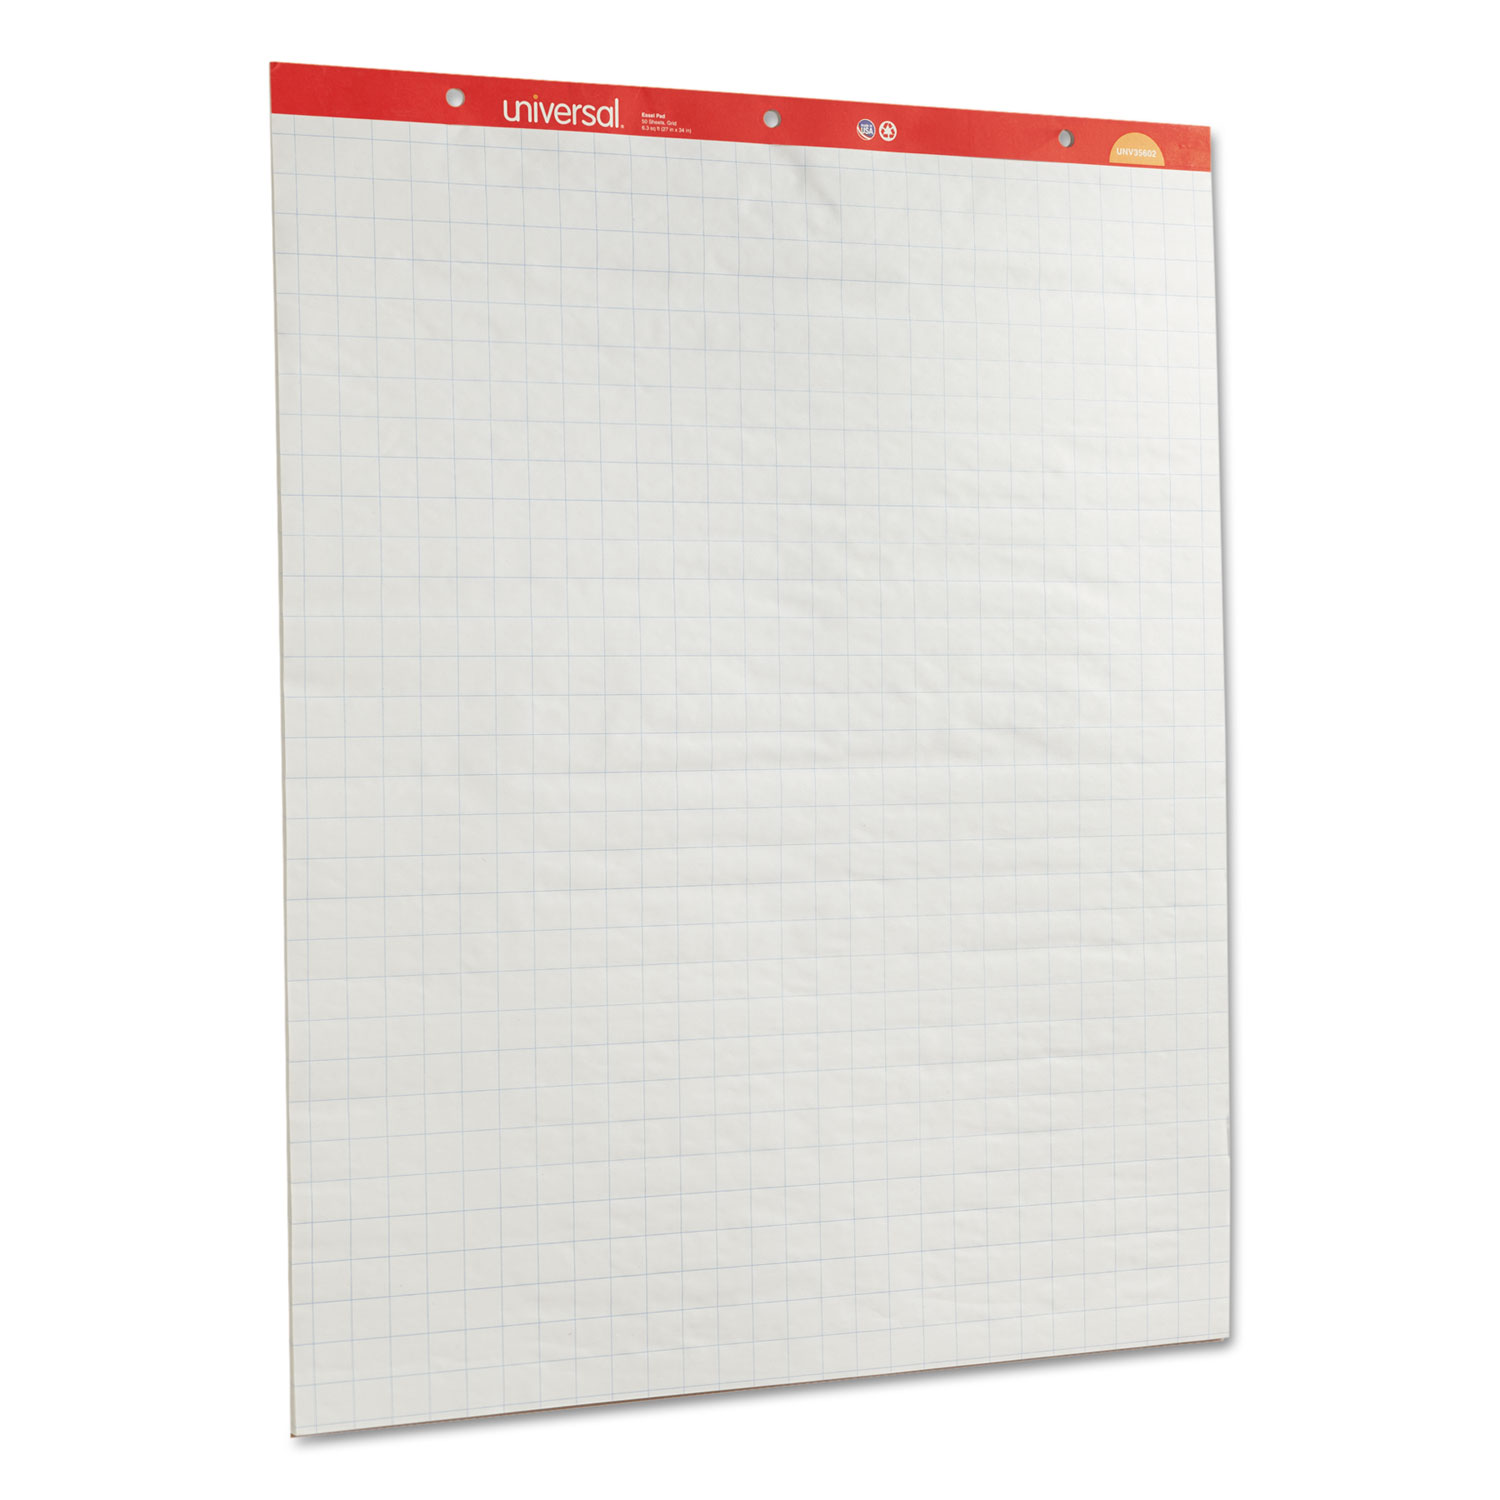 0087547356029 - RECYCLED EASEL PADS QUADRILLE RULE 27 X 34 WHITE 50-SHEET 2/CTN